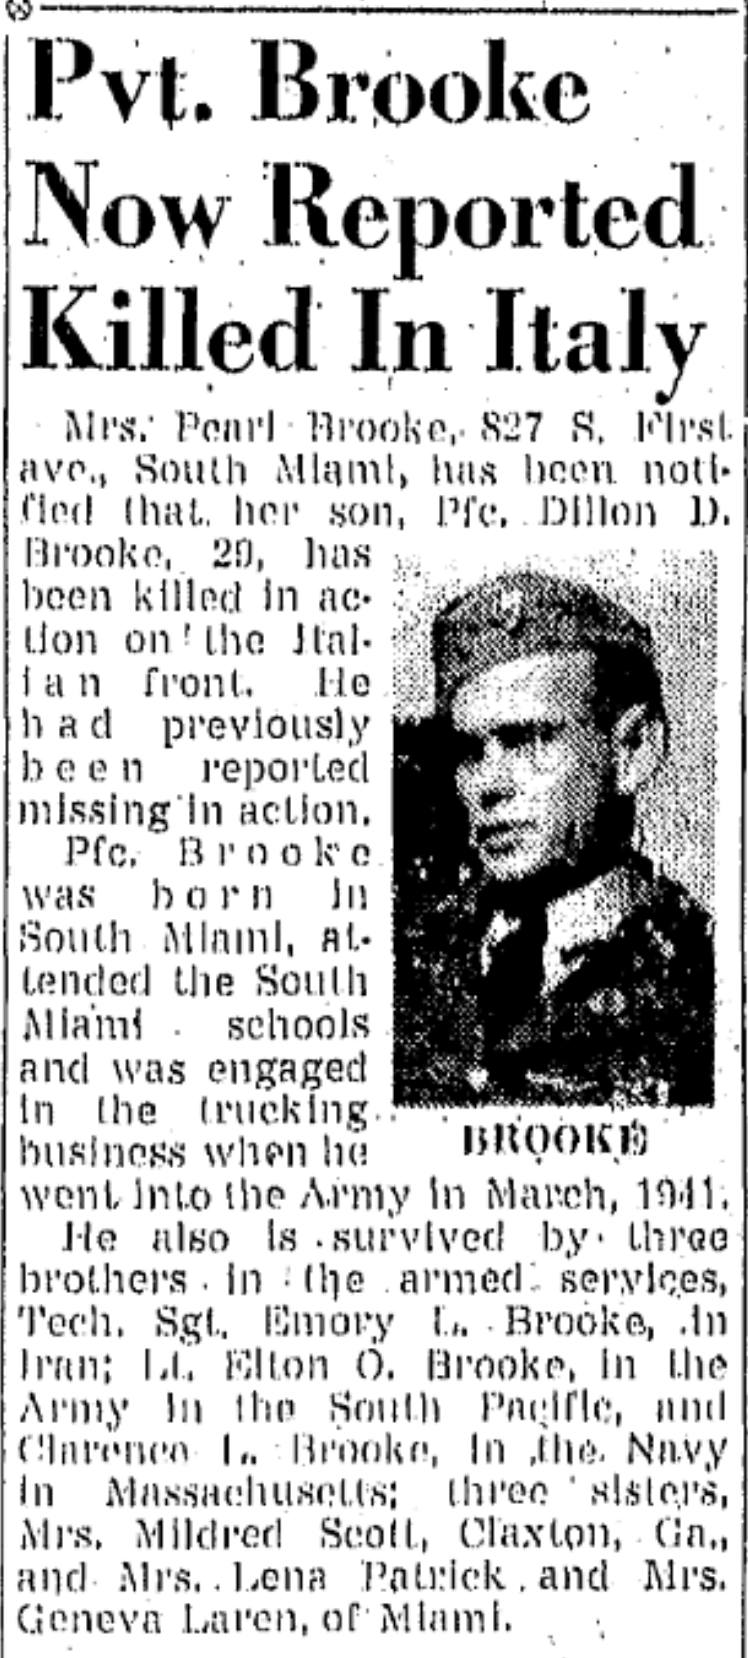 Miami Herald Article Announcing Pvt. Brooke’s Death in Italy